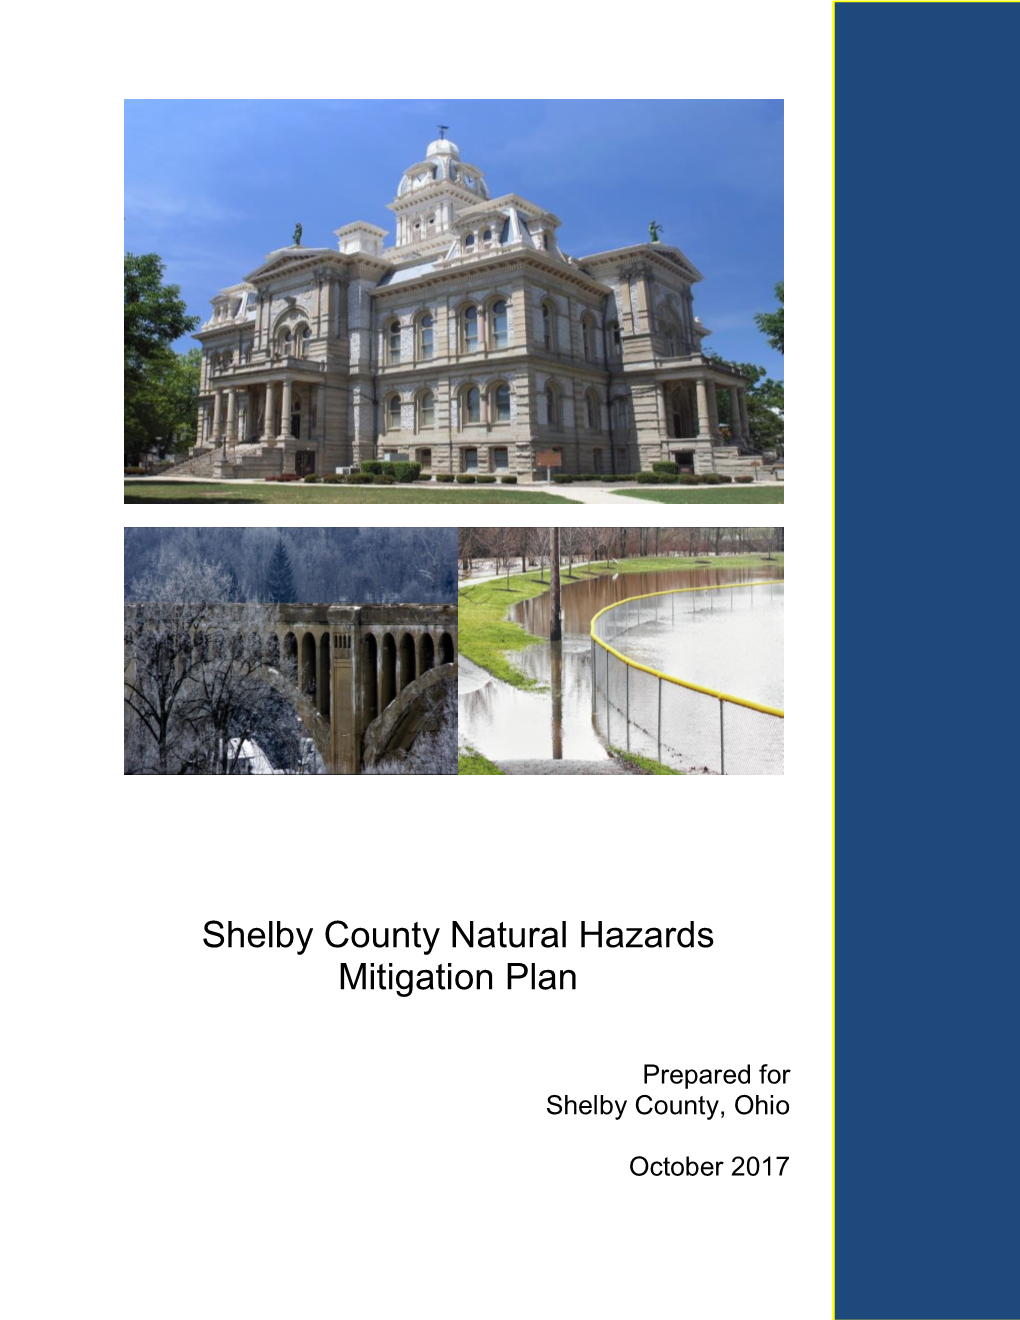 Shelby County Natural Hazards Mitigation Plan